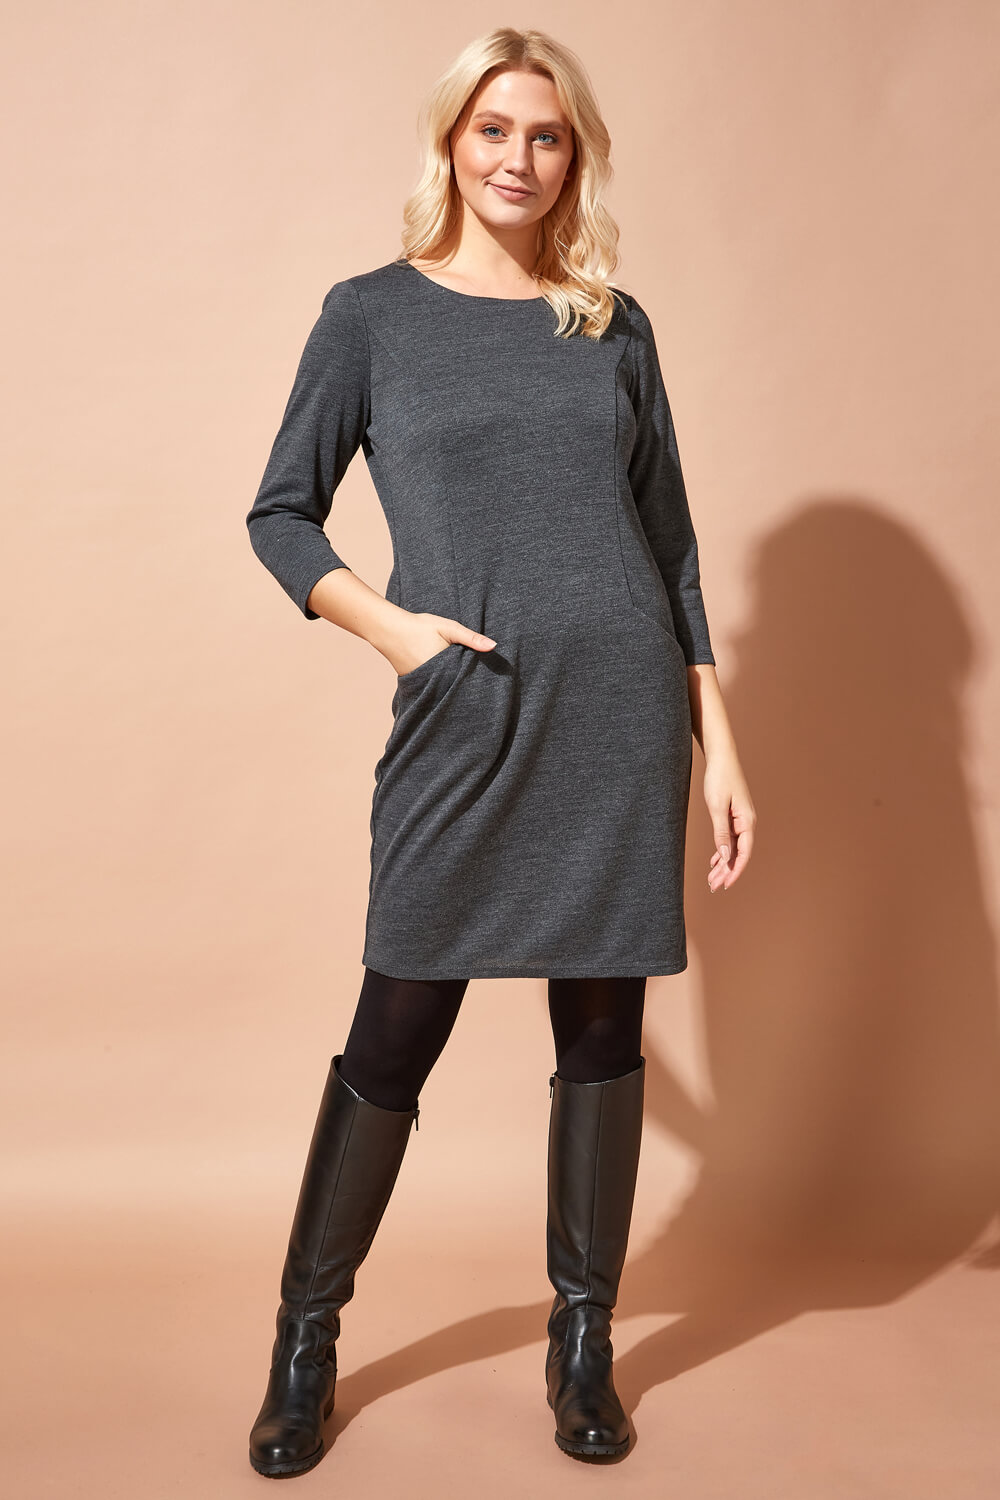 Charcoal Relaxed Sleeve Pocket Dress, Image 2 of 4